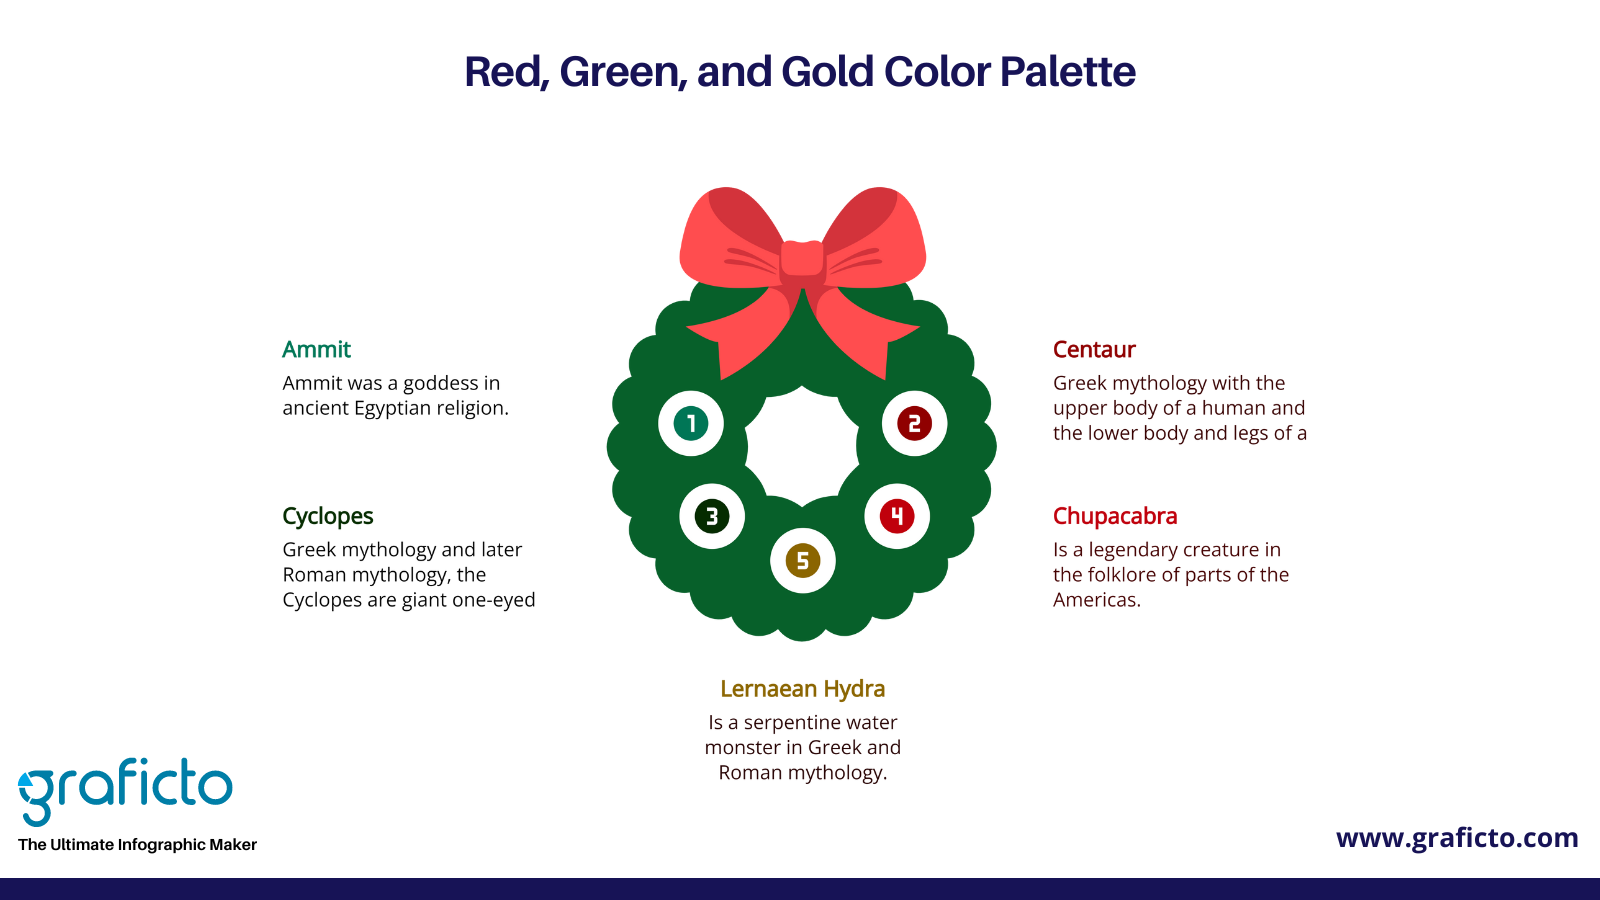 Red, Green, and Gold graficto Christmas Color Palettes